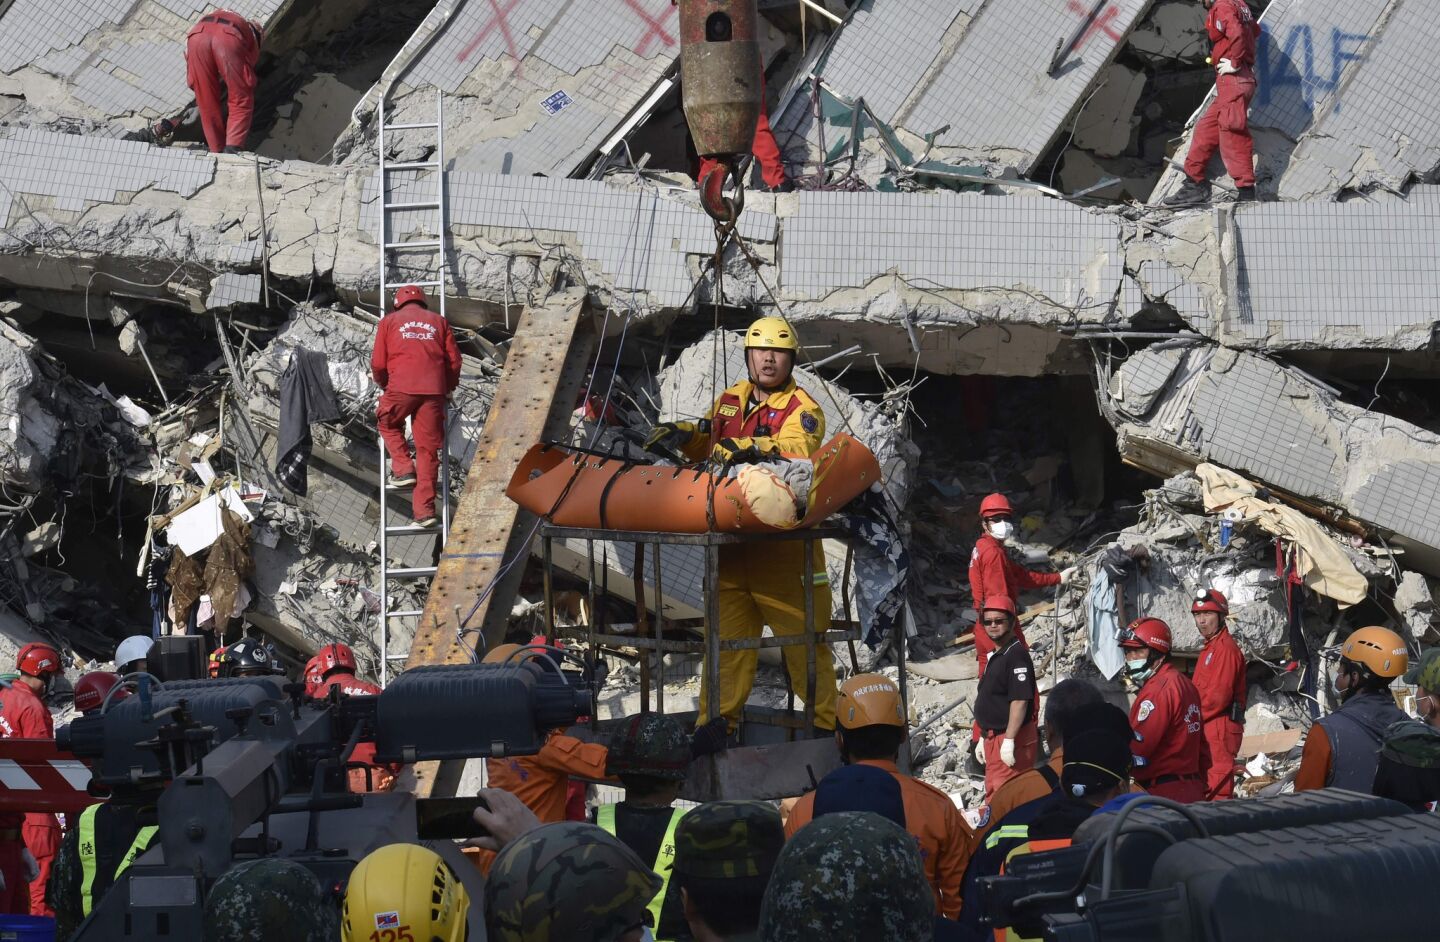 A rescue worker brings a victim down from the collapsed Wei Kuan complex in Tainan, southern Taiwan.